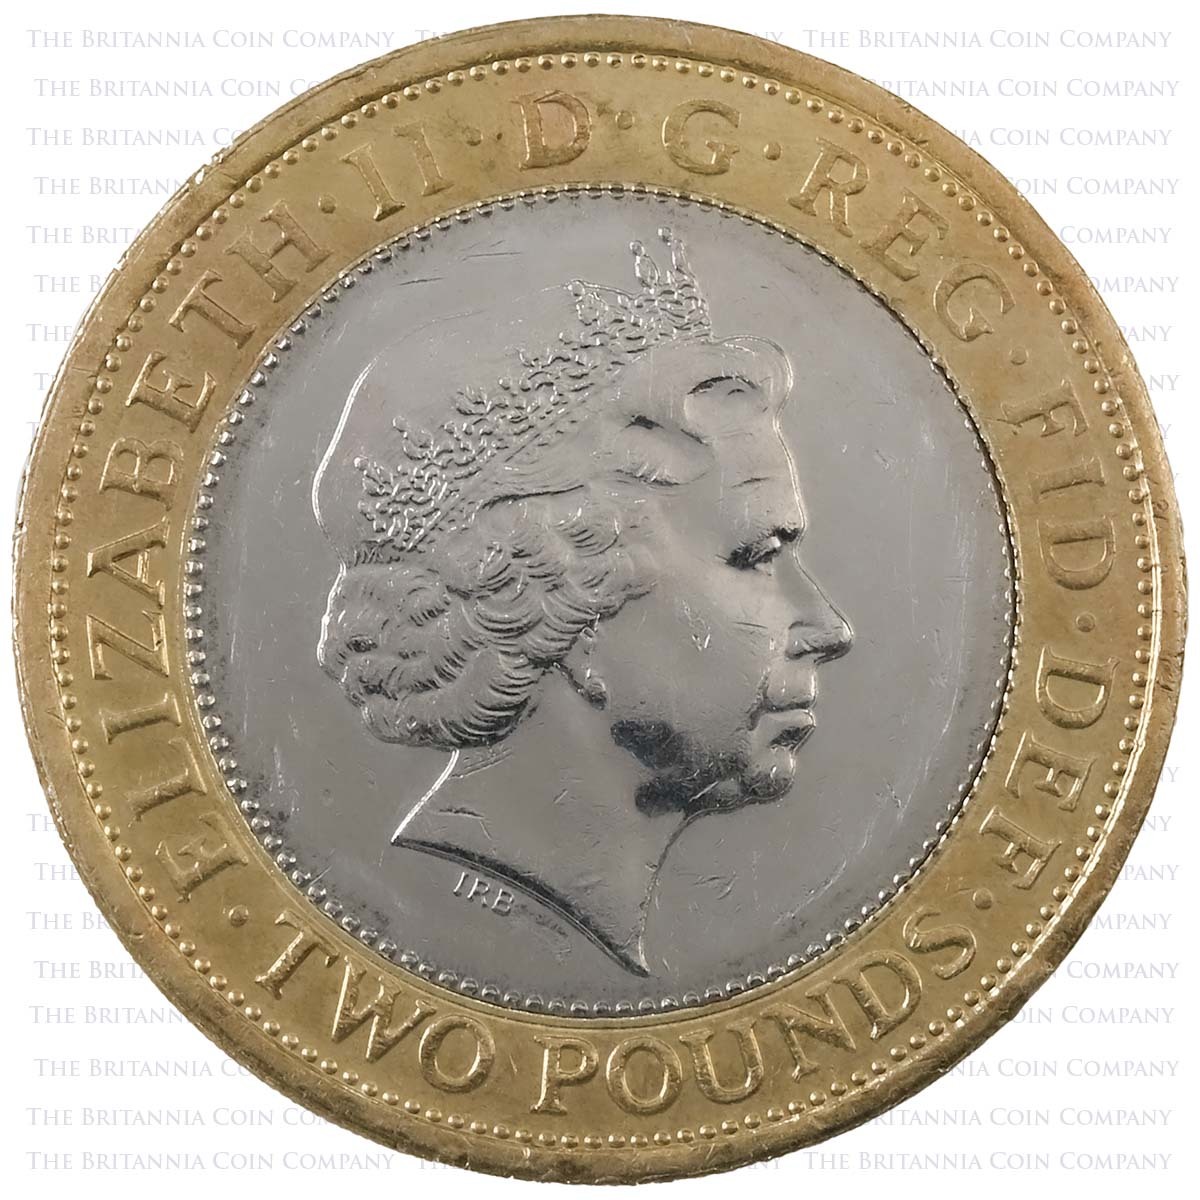 2011 King James Bible Circulated Two Pound Coin Obverse